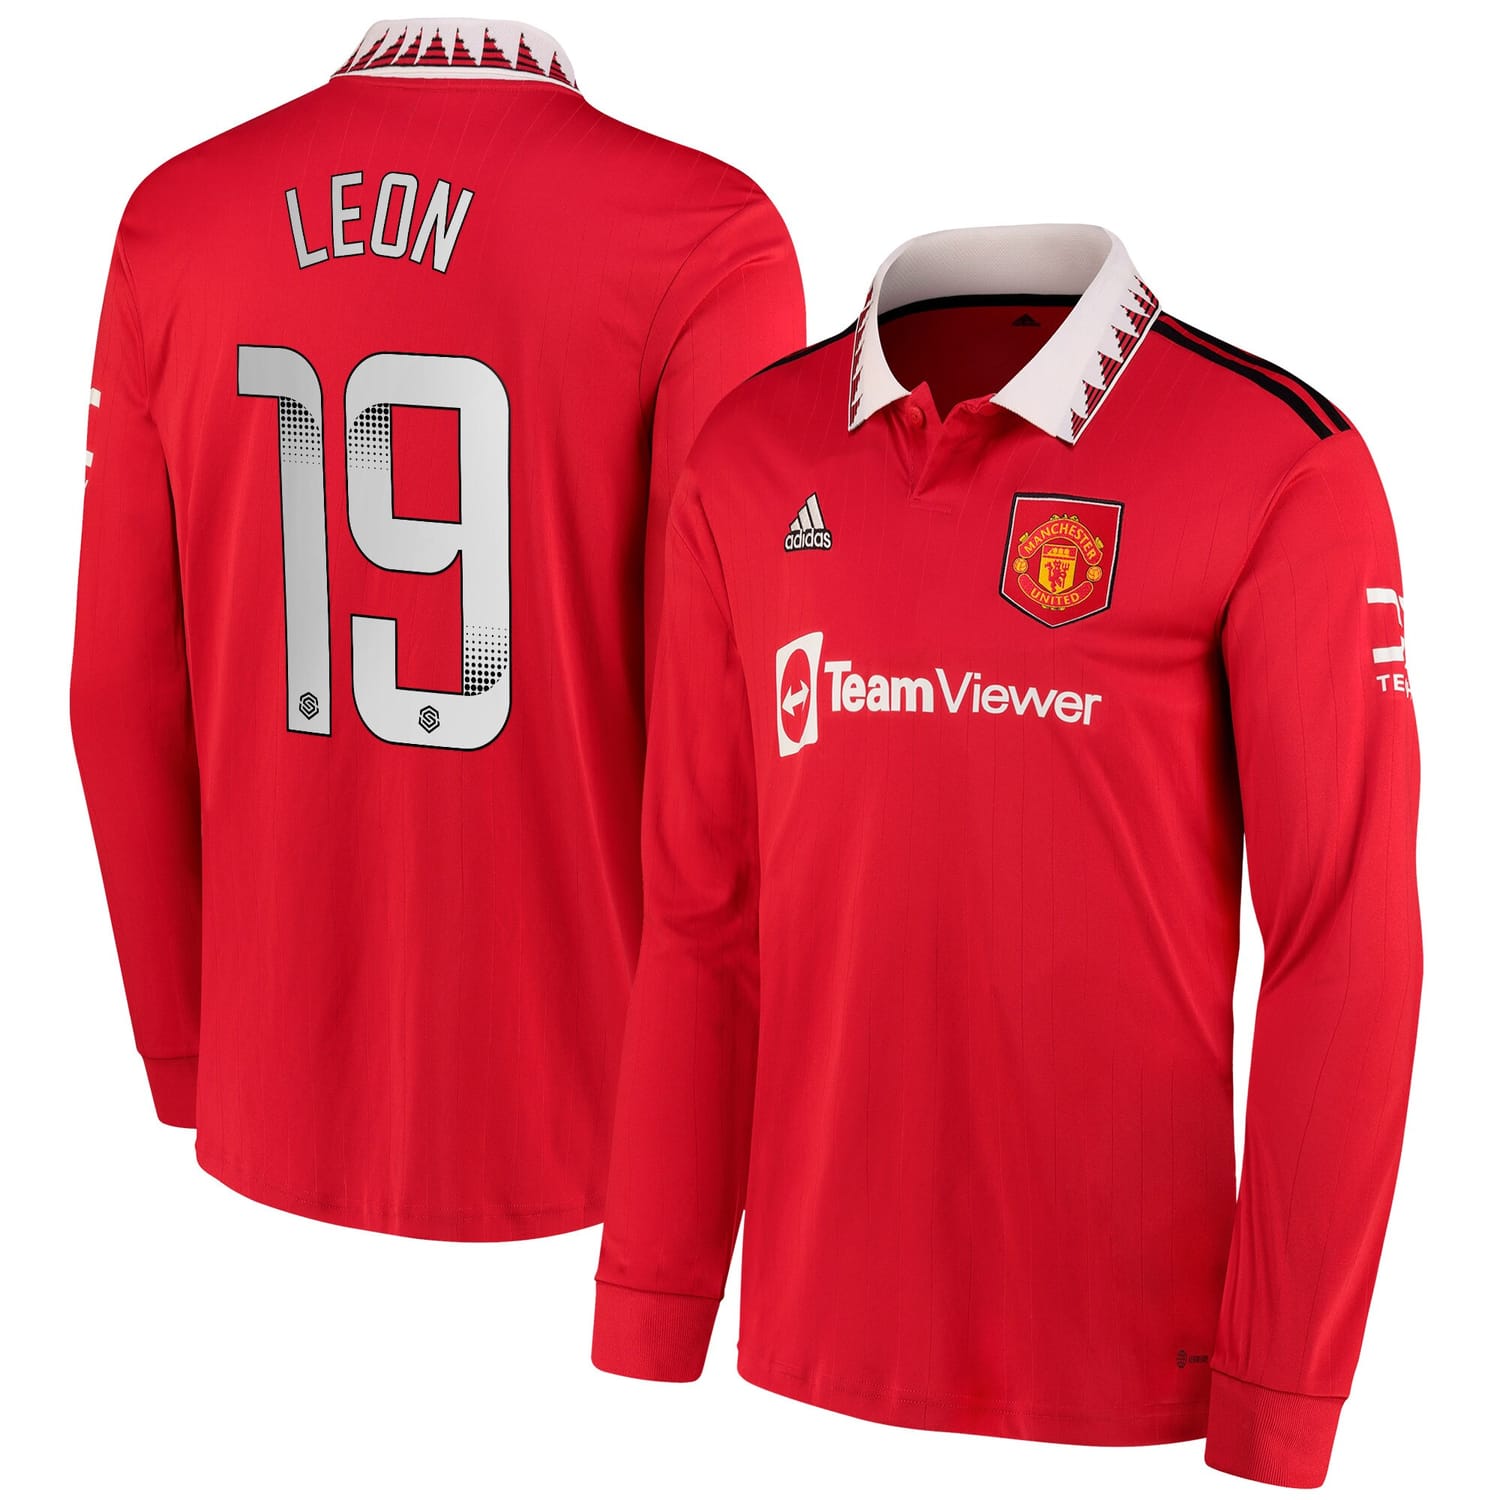 Premier League Manchester United Home WSL Jersey Shirt Long Sleeve 2022-23 player Adriana Leon 19 printing for Men